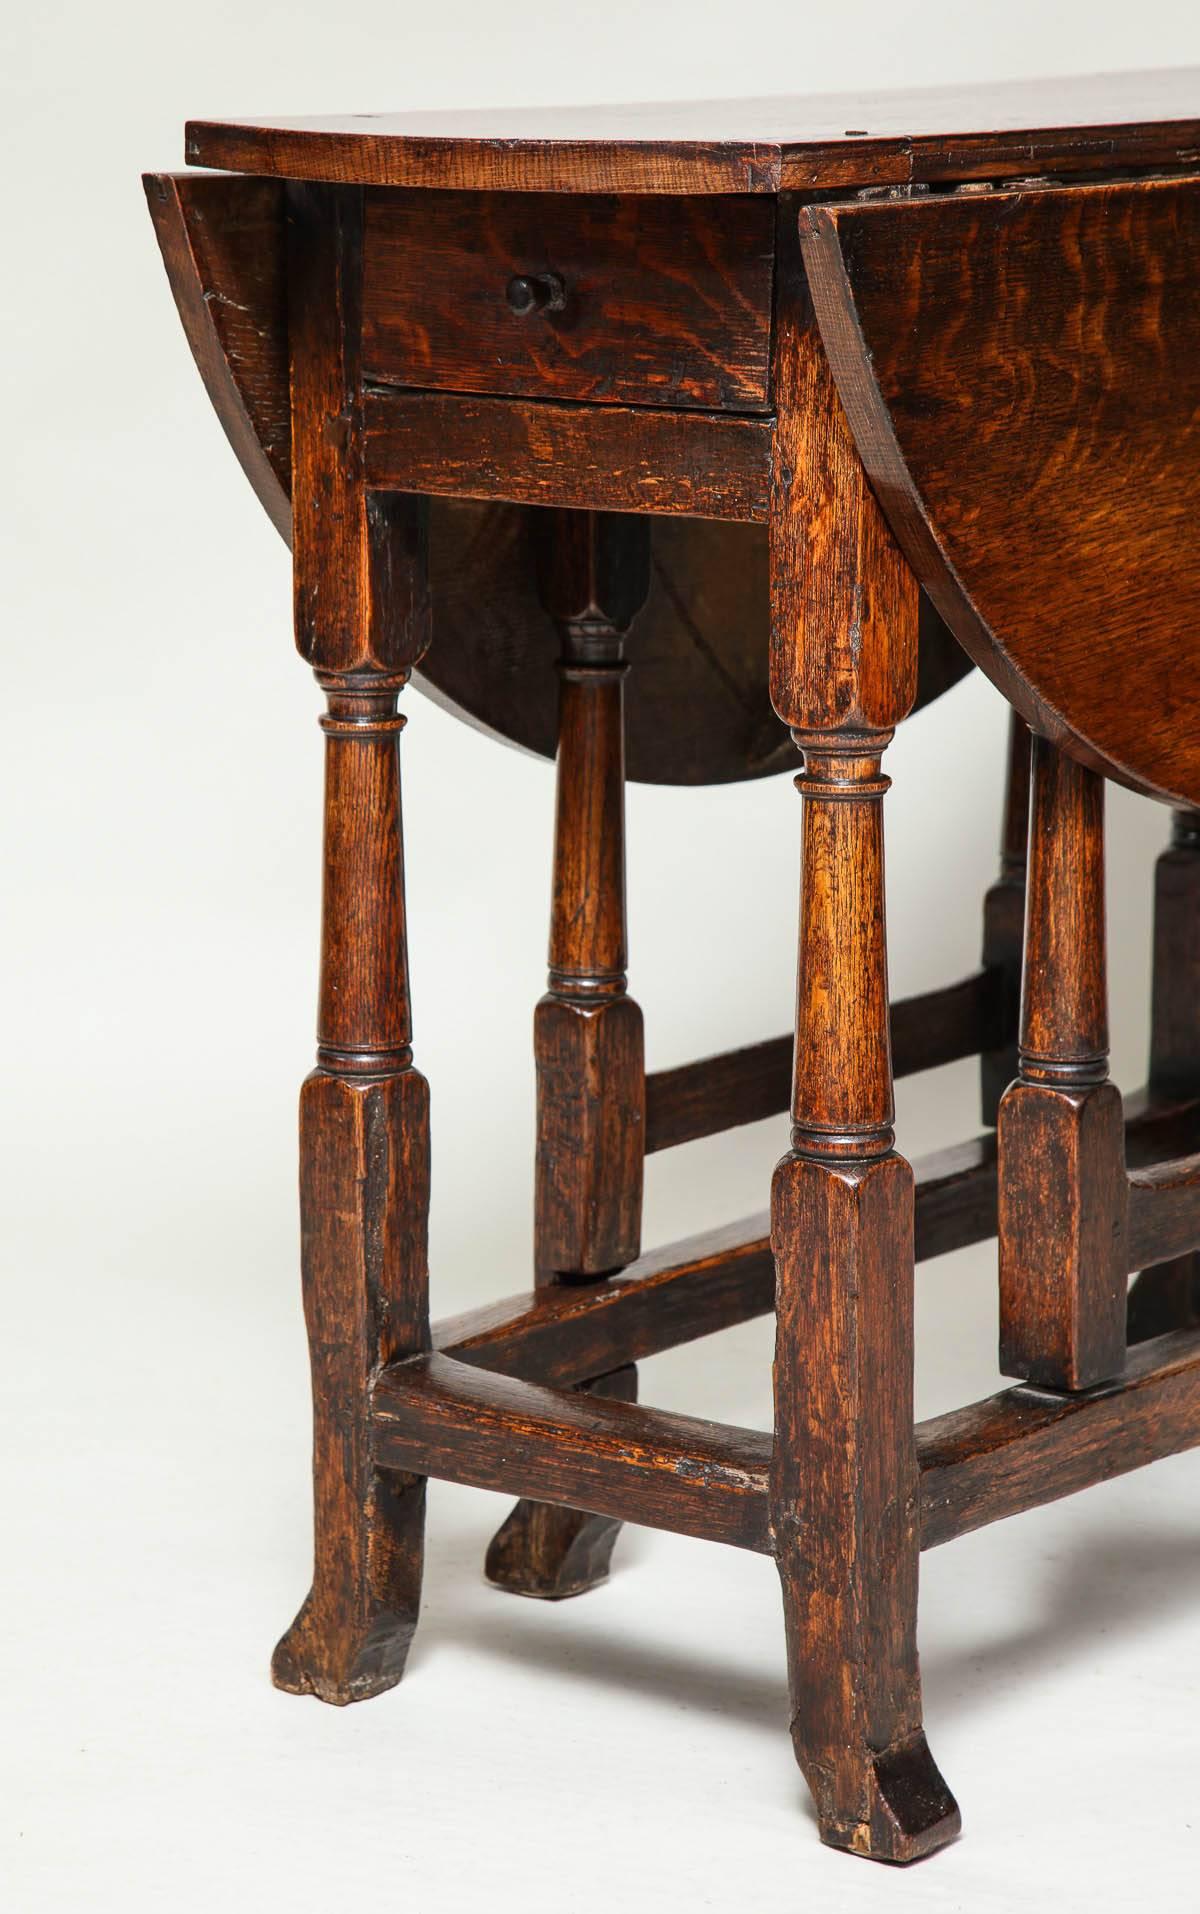 Good early 18th century English oak gateleg table of diminutive scale, the oval top with square edge over single drawer, over cannon barrel turned balustrade legs joined by box stretcher, the feet with unusual swept toe and the whole with good, rich